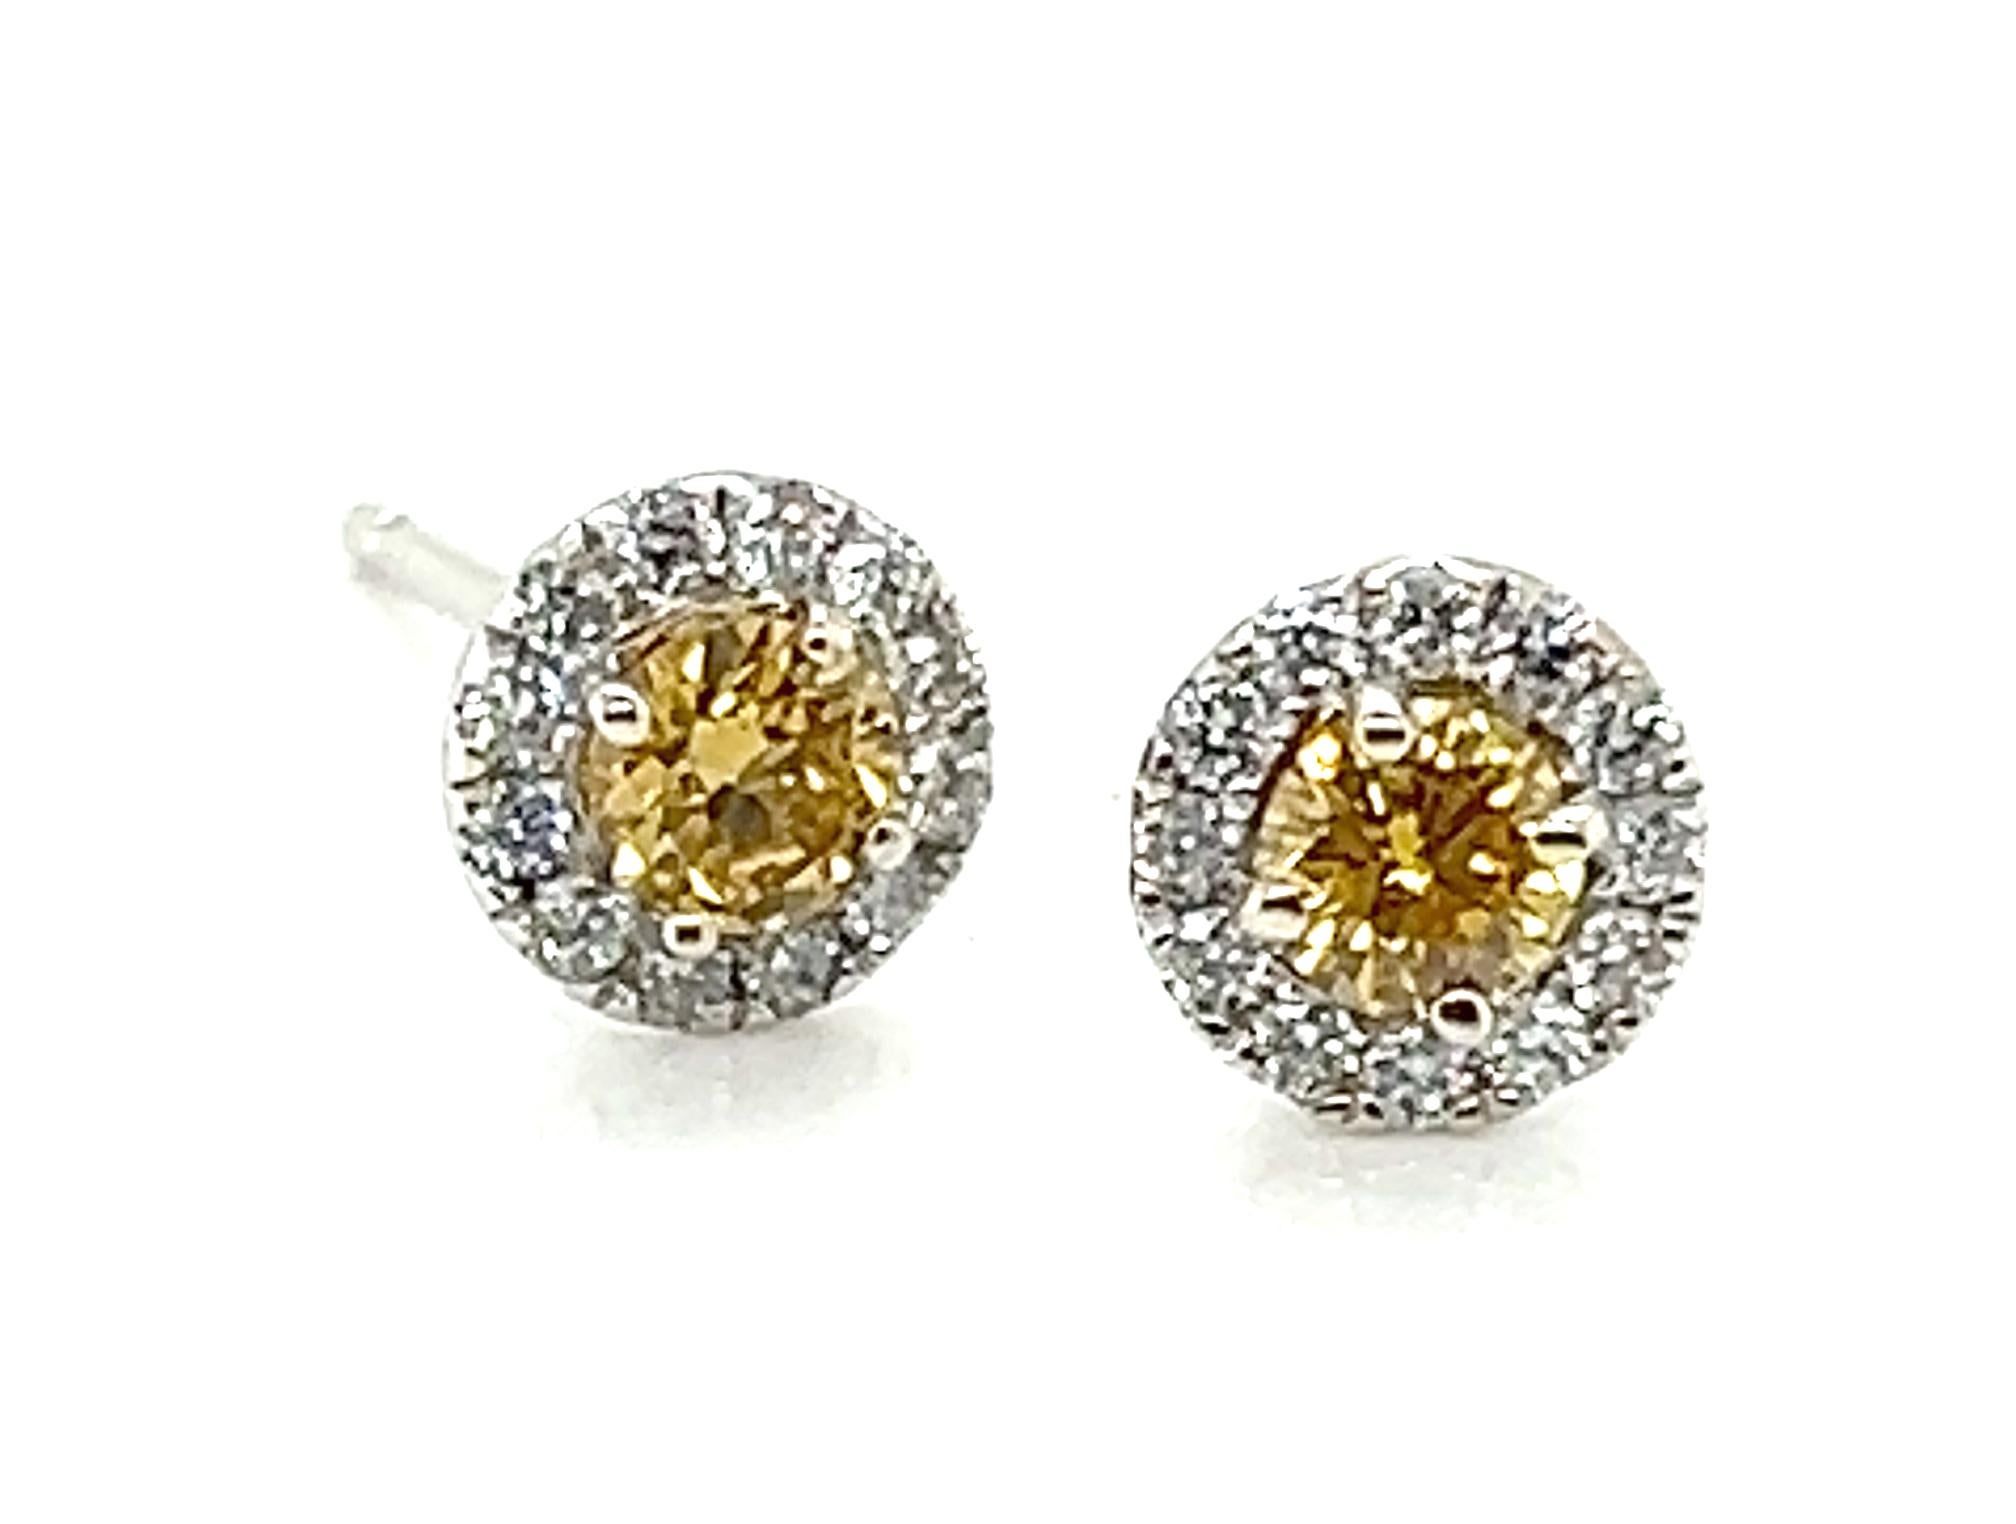 GIA Fancy Orangy Yellow Diamond Halo Stud Earrings .83ct Round Brilliant Brand New 14K


Featuring Two Glamorous Genuine GIA Certified Fancy Brownish Orangy Yellow Round Brilliant Cut Diamond 

Halo Earrings Flaunts Mesmerizing Round-Cut Prong-Set